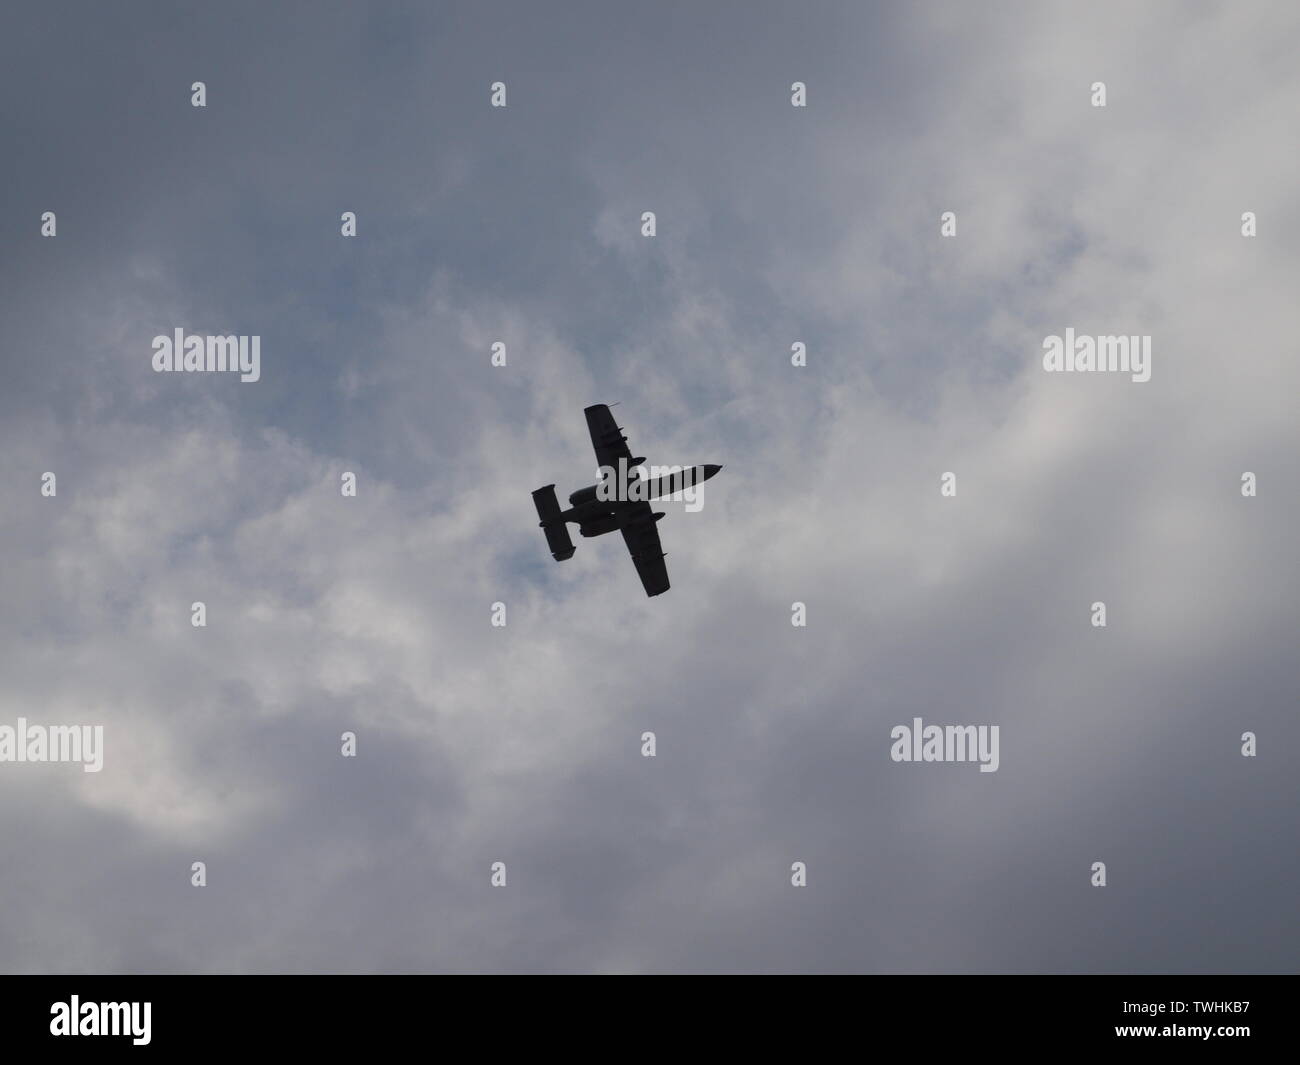 A-10 Thunderbolt, aka 'Warthog' flying low over the New Jersey shore. Stock Photo